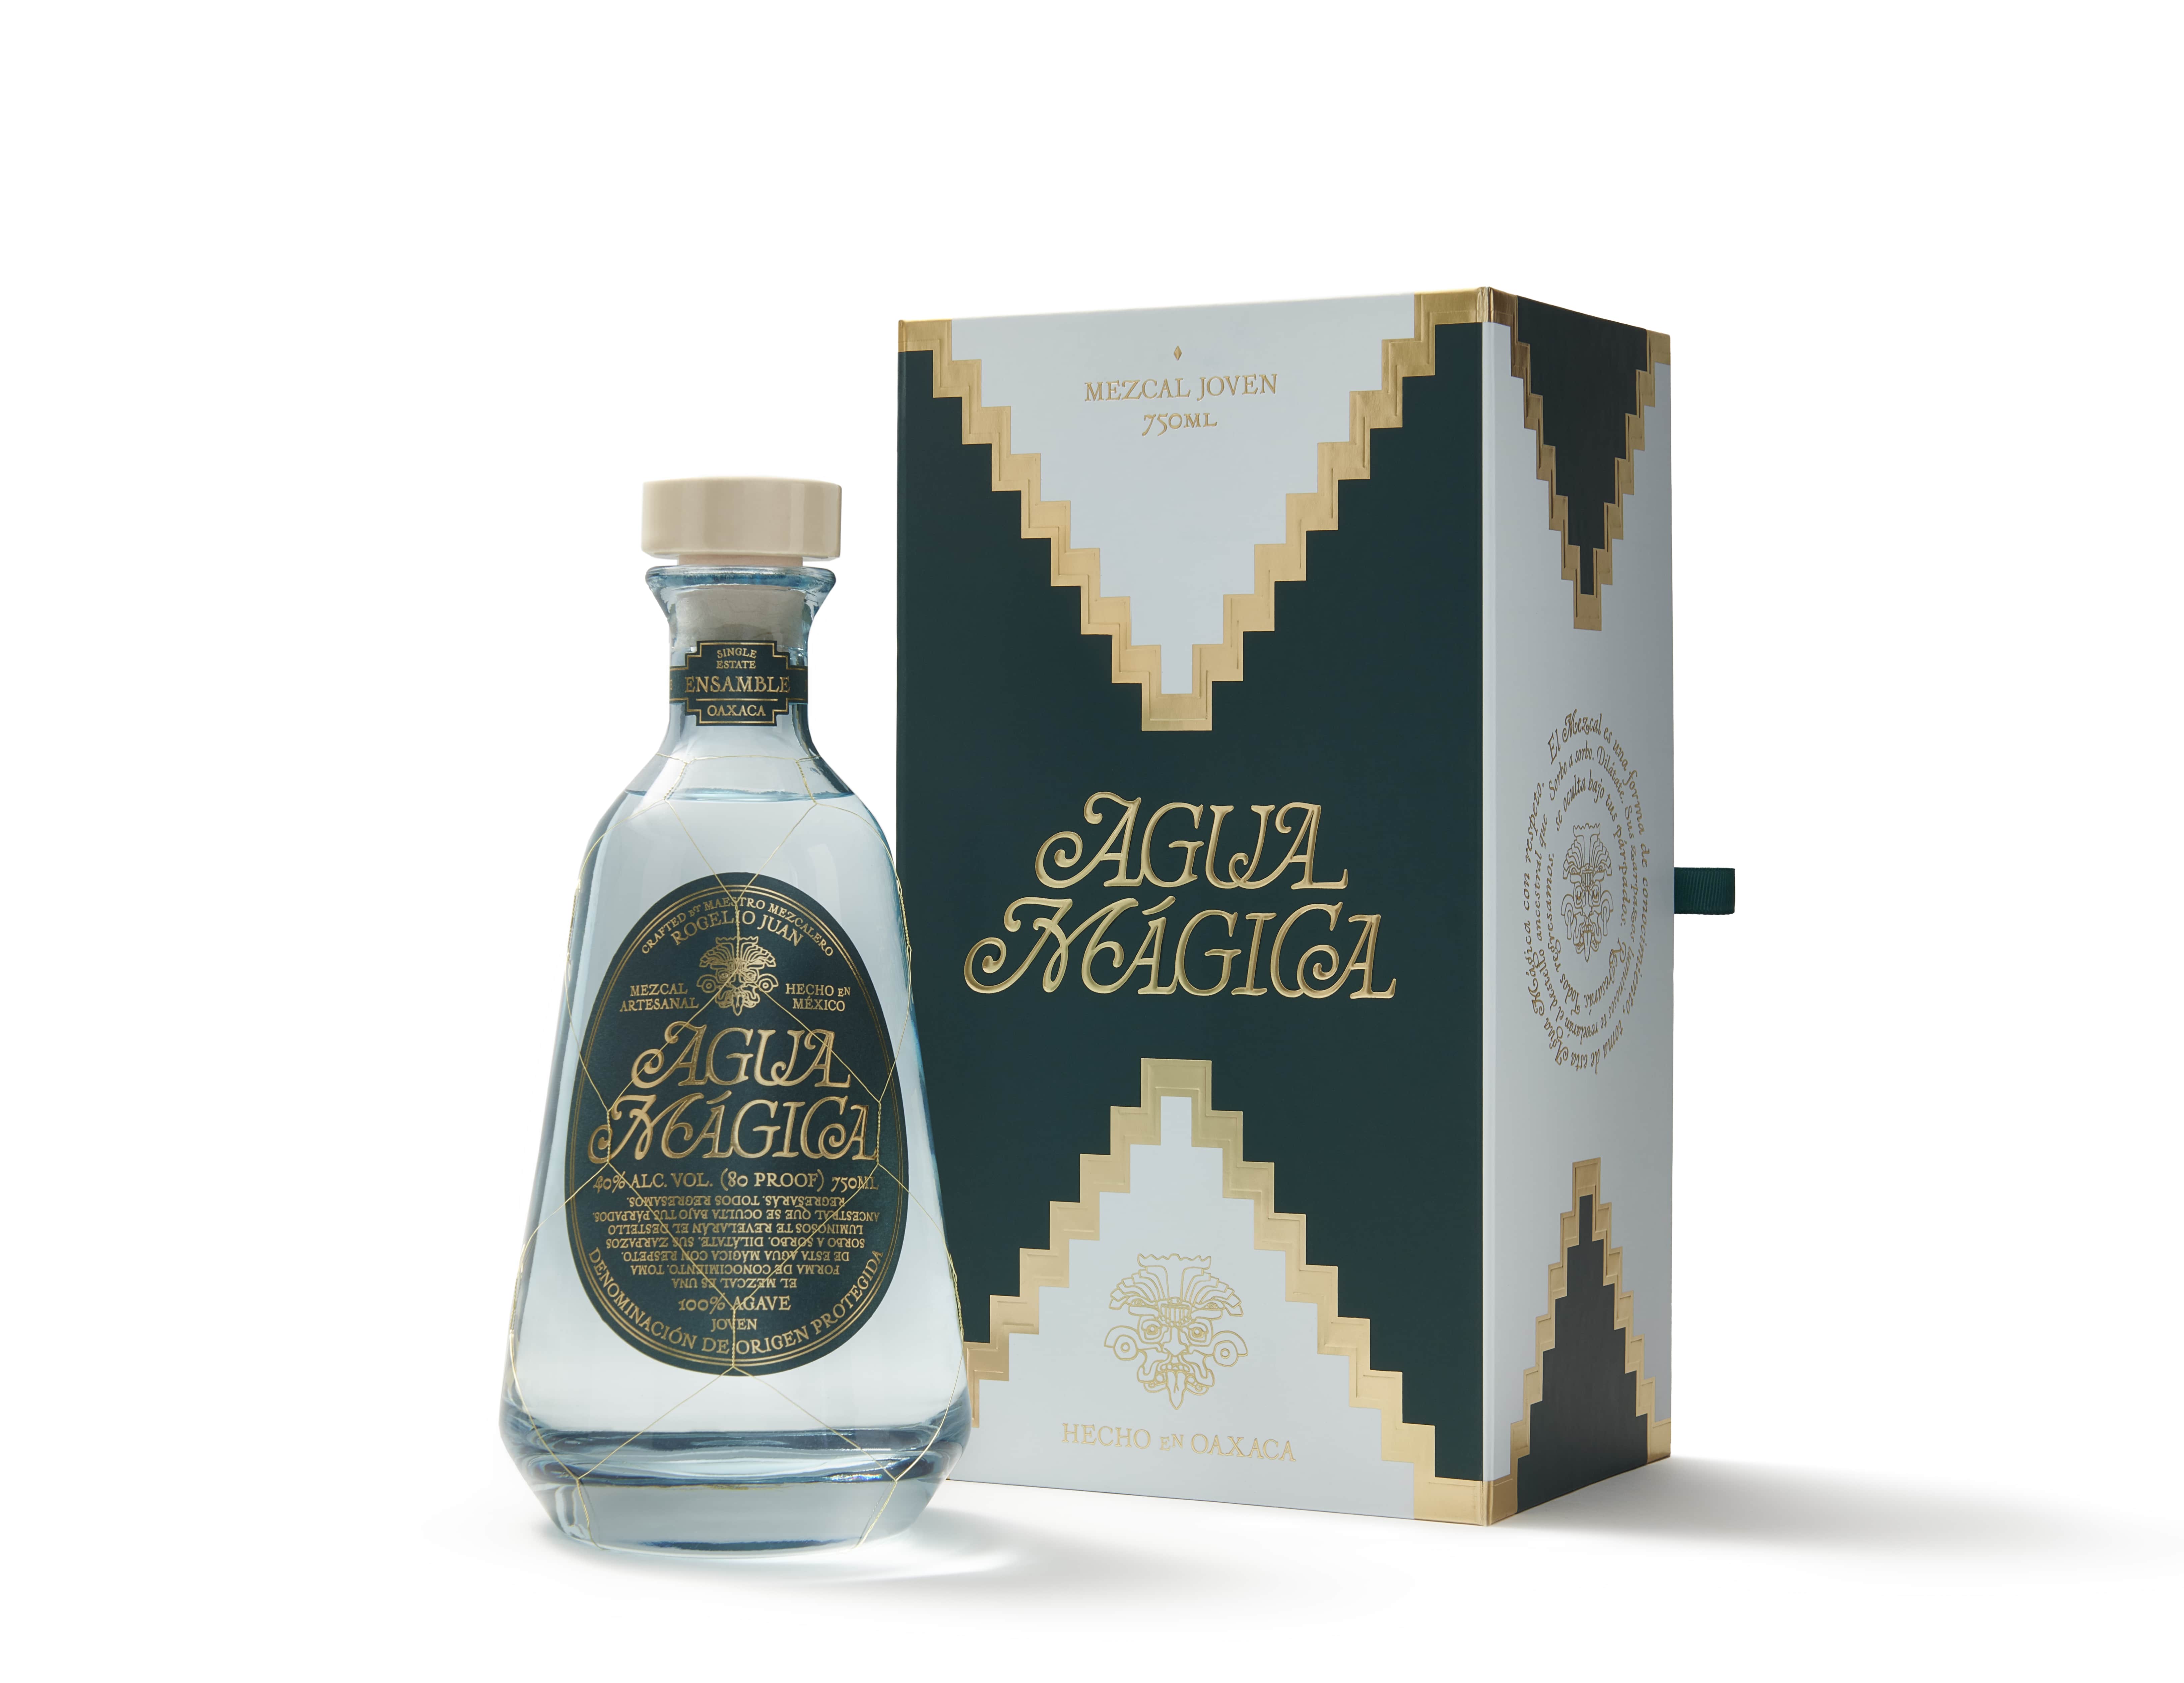 Agua Mágica Mezcal and Mythology Create Storybook Packaging Inspired by Oaxacan Traditions